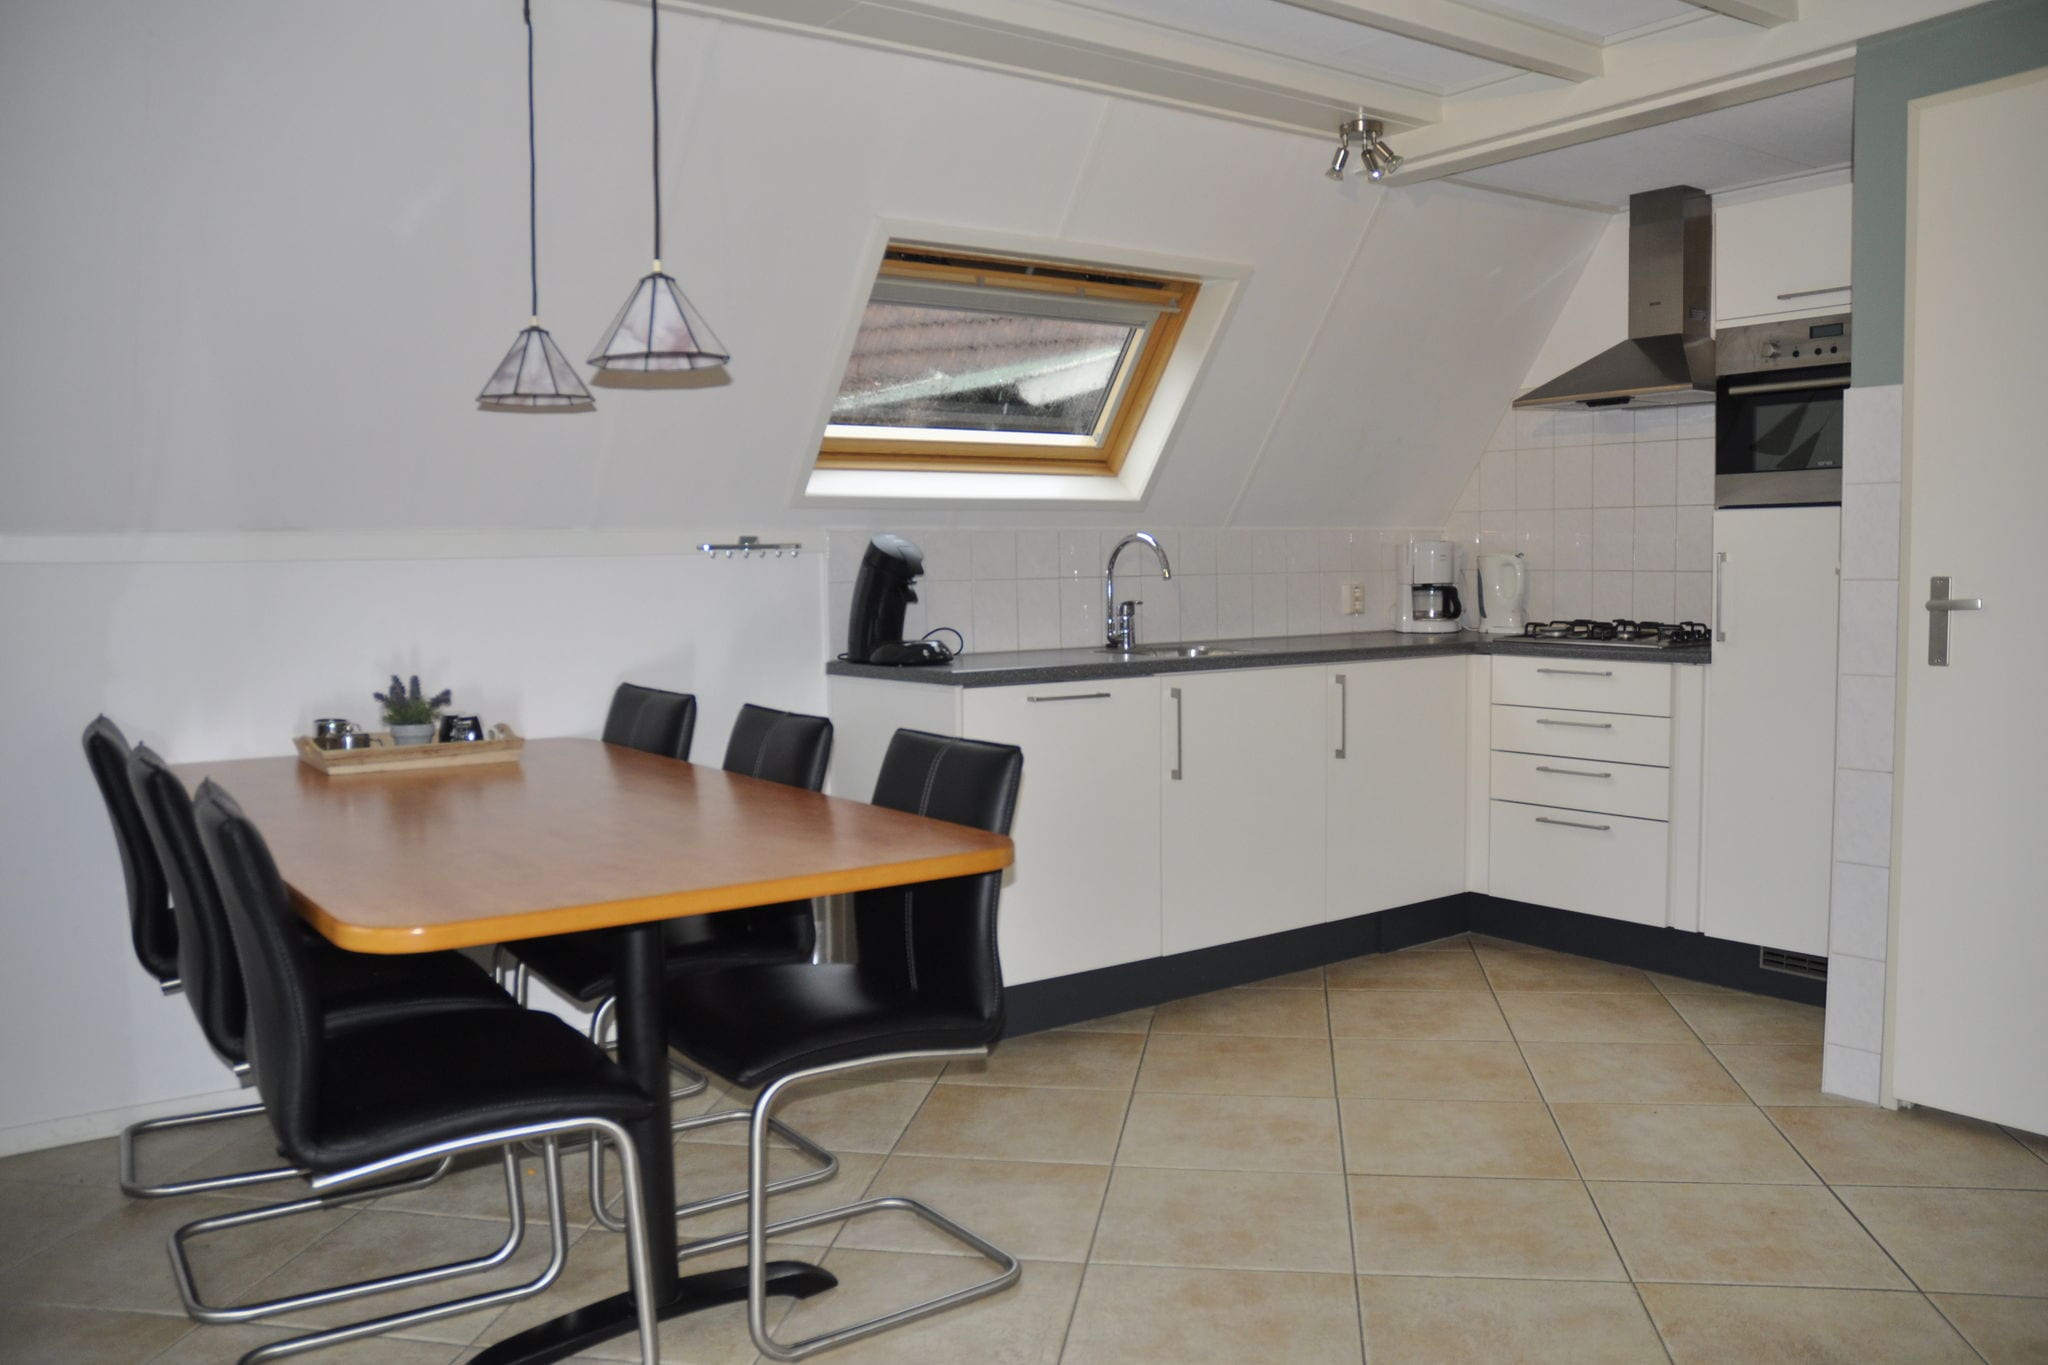 Detached holiday home with dishwasher, 16 km. from Assen